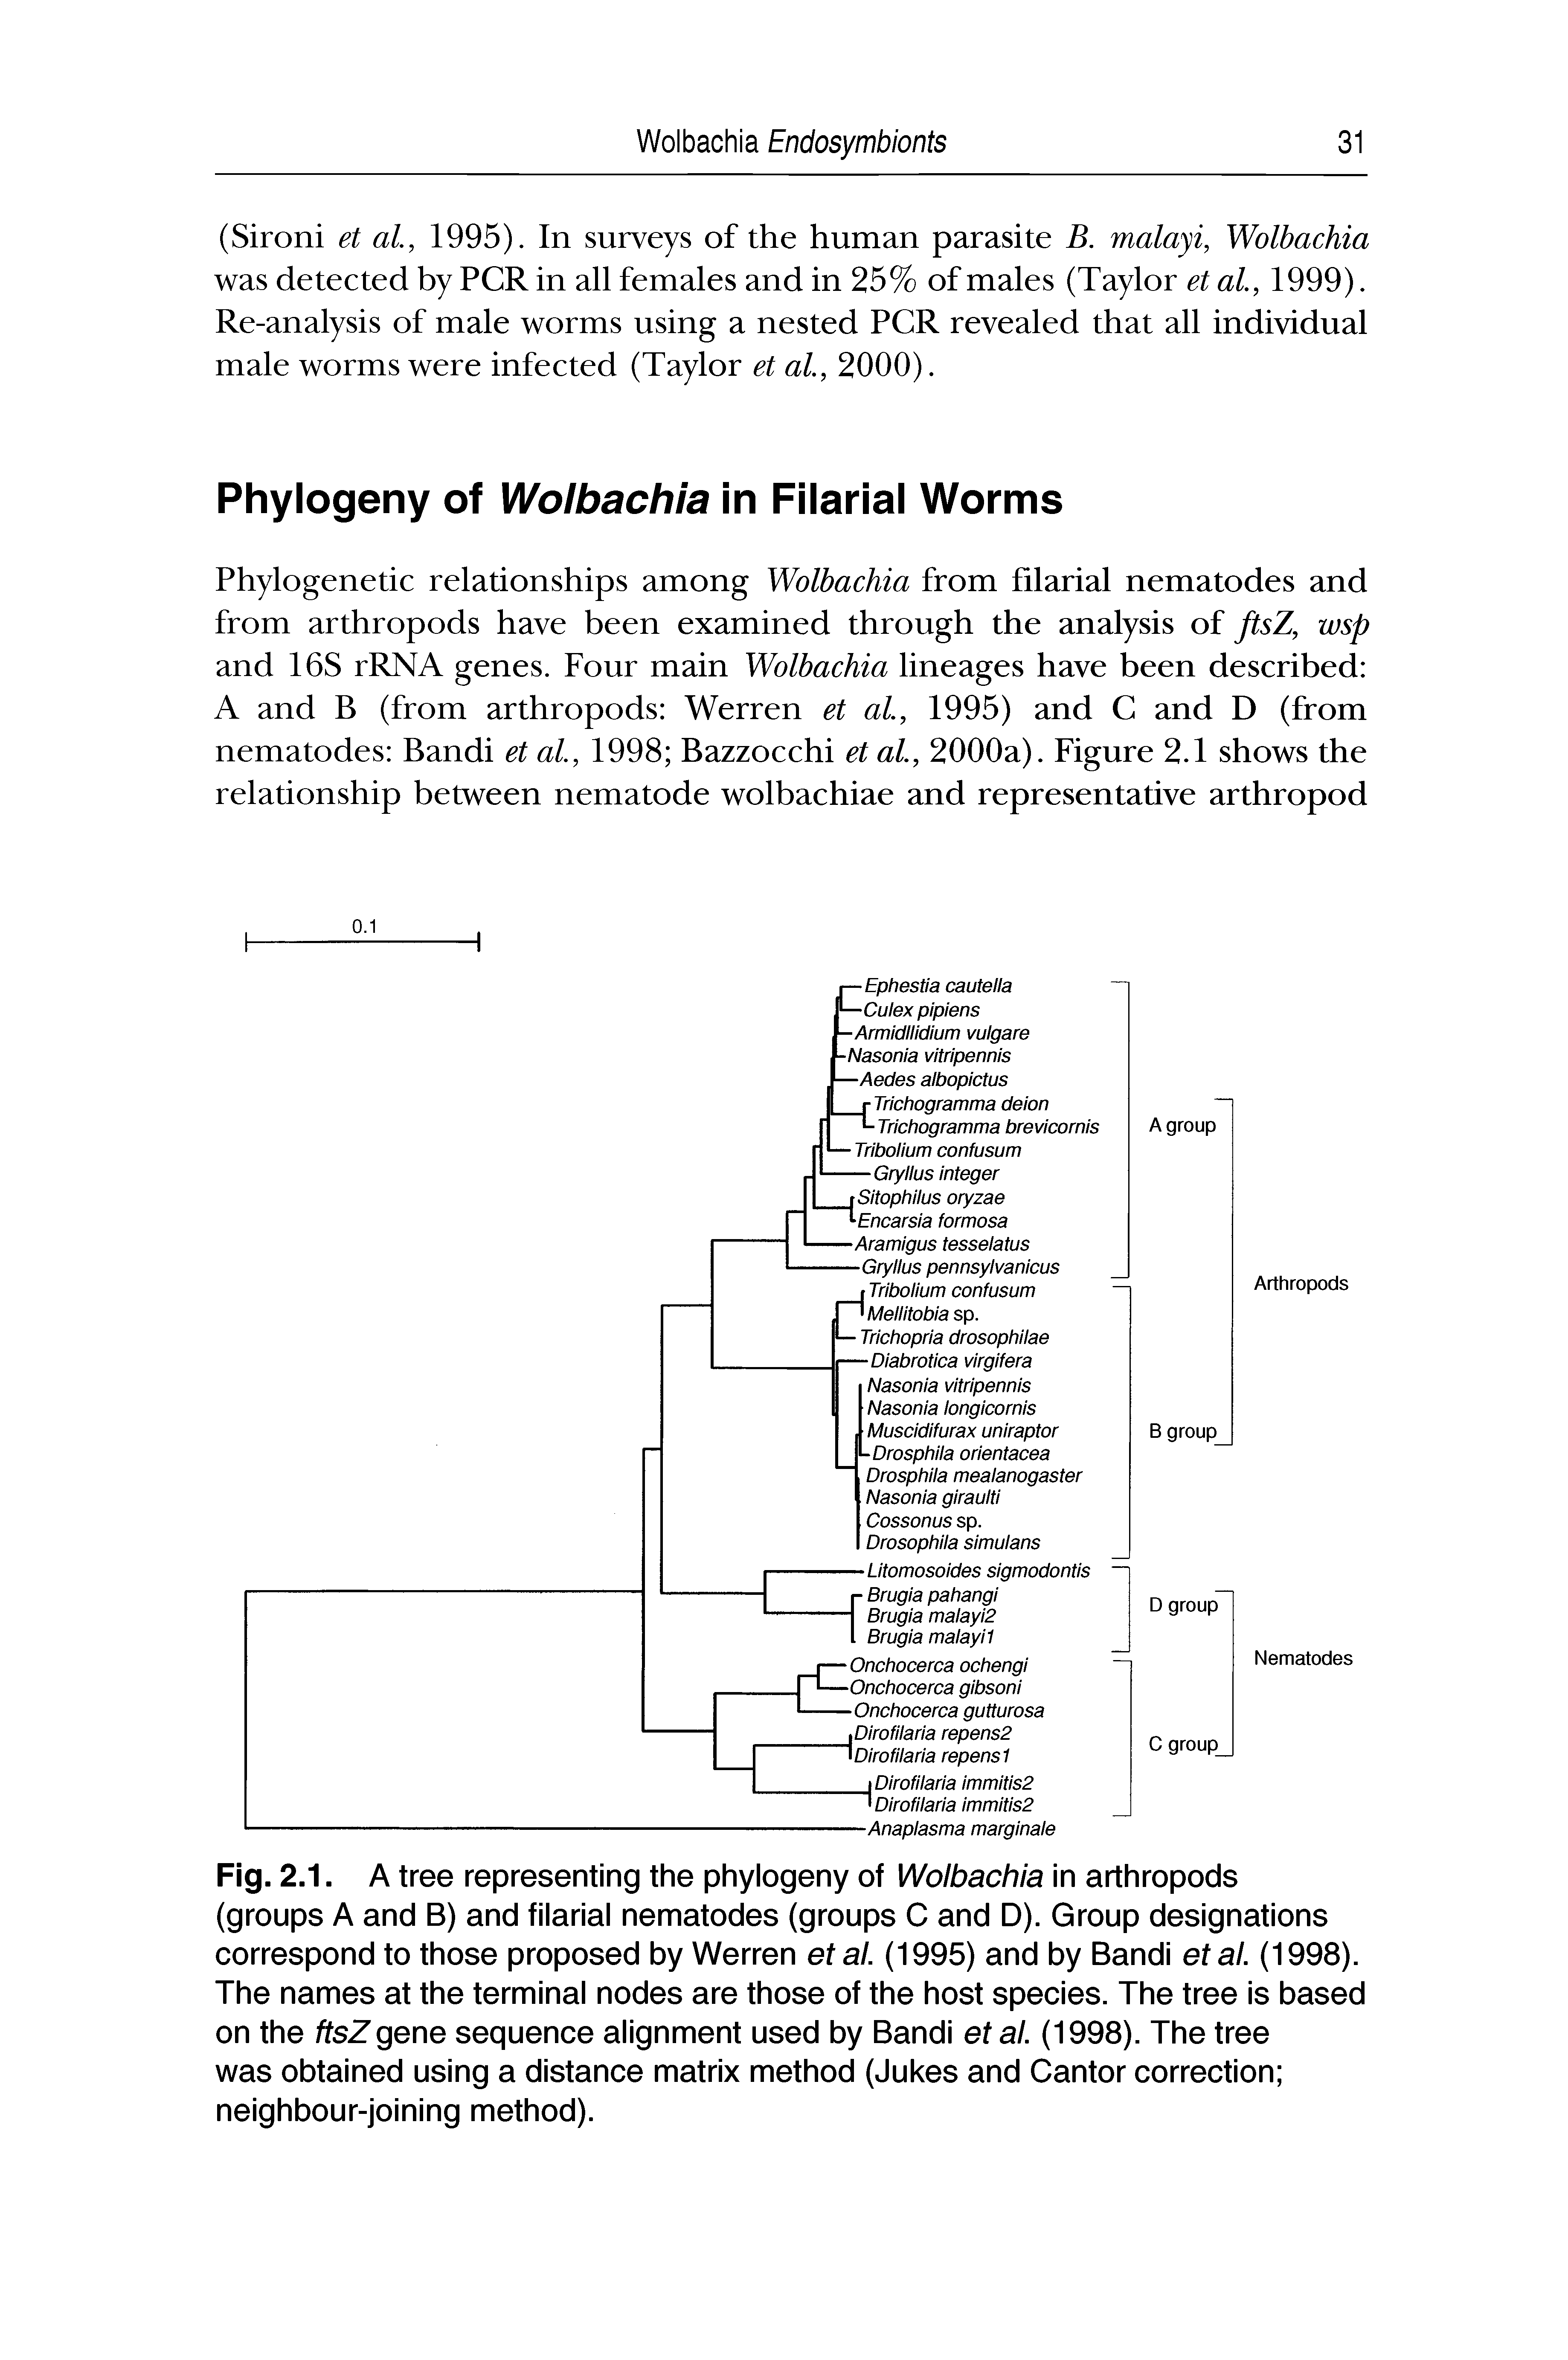 Fig. 2.1. A tree representing the phylogeny of Wolbachia in arthropods (groups A and B) and filarial nematodes (groups C and D). Group designations correspond to those proposed by Werren etal. (1995) and by Bandi etal. (1998). The names at the terminal nodes are those of the host species. The tree is based on the ftsZgene sequence alignment used by Bandi etal. (1998). The tree was obtained using a distance matrix method (Jukes and Cantor correction neighbour-joining method).